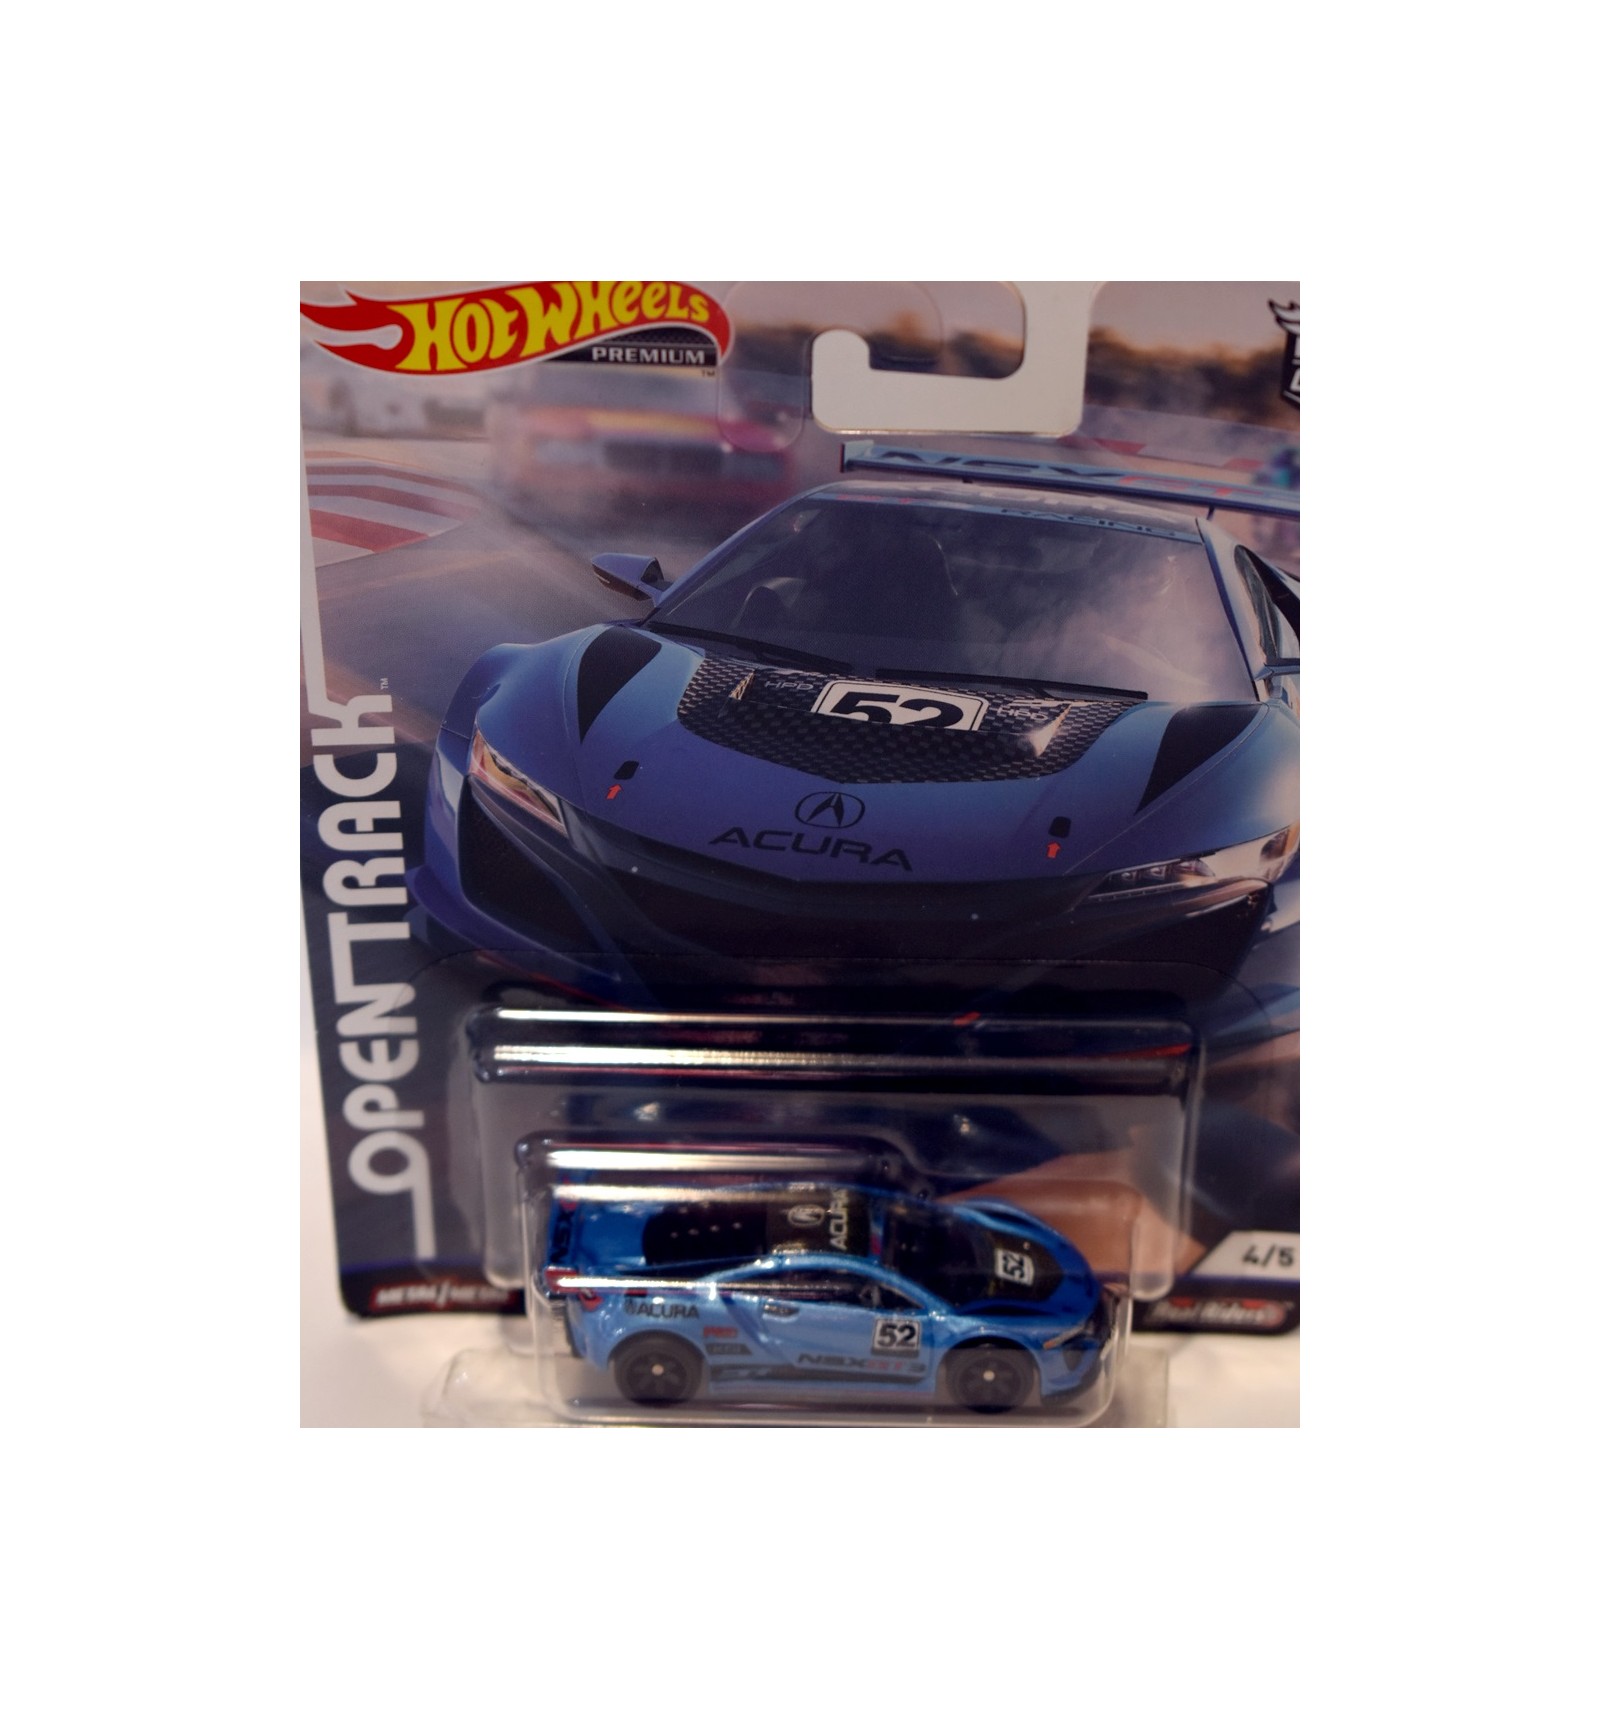 ACURA NSX GT3 #4/5☆Blue;52; Real Riders☆2019 Hot Wheels OPEN TRACK Car Culture 